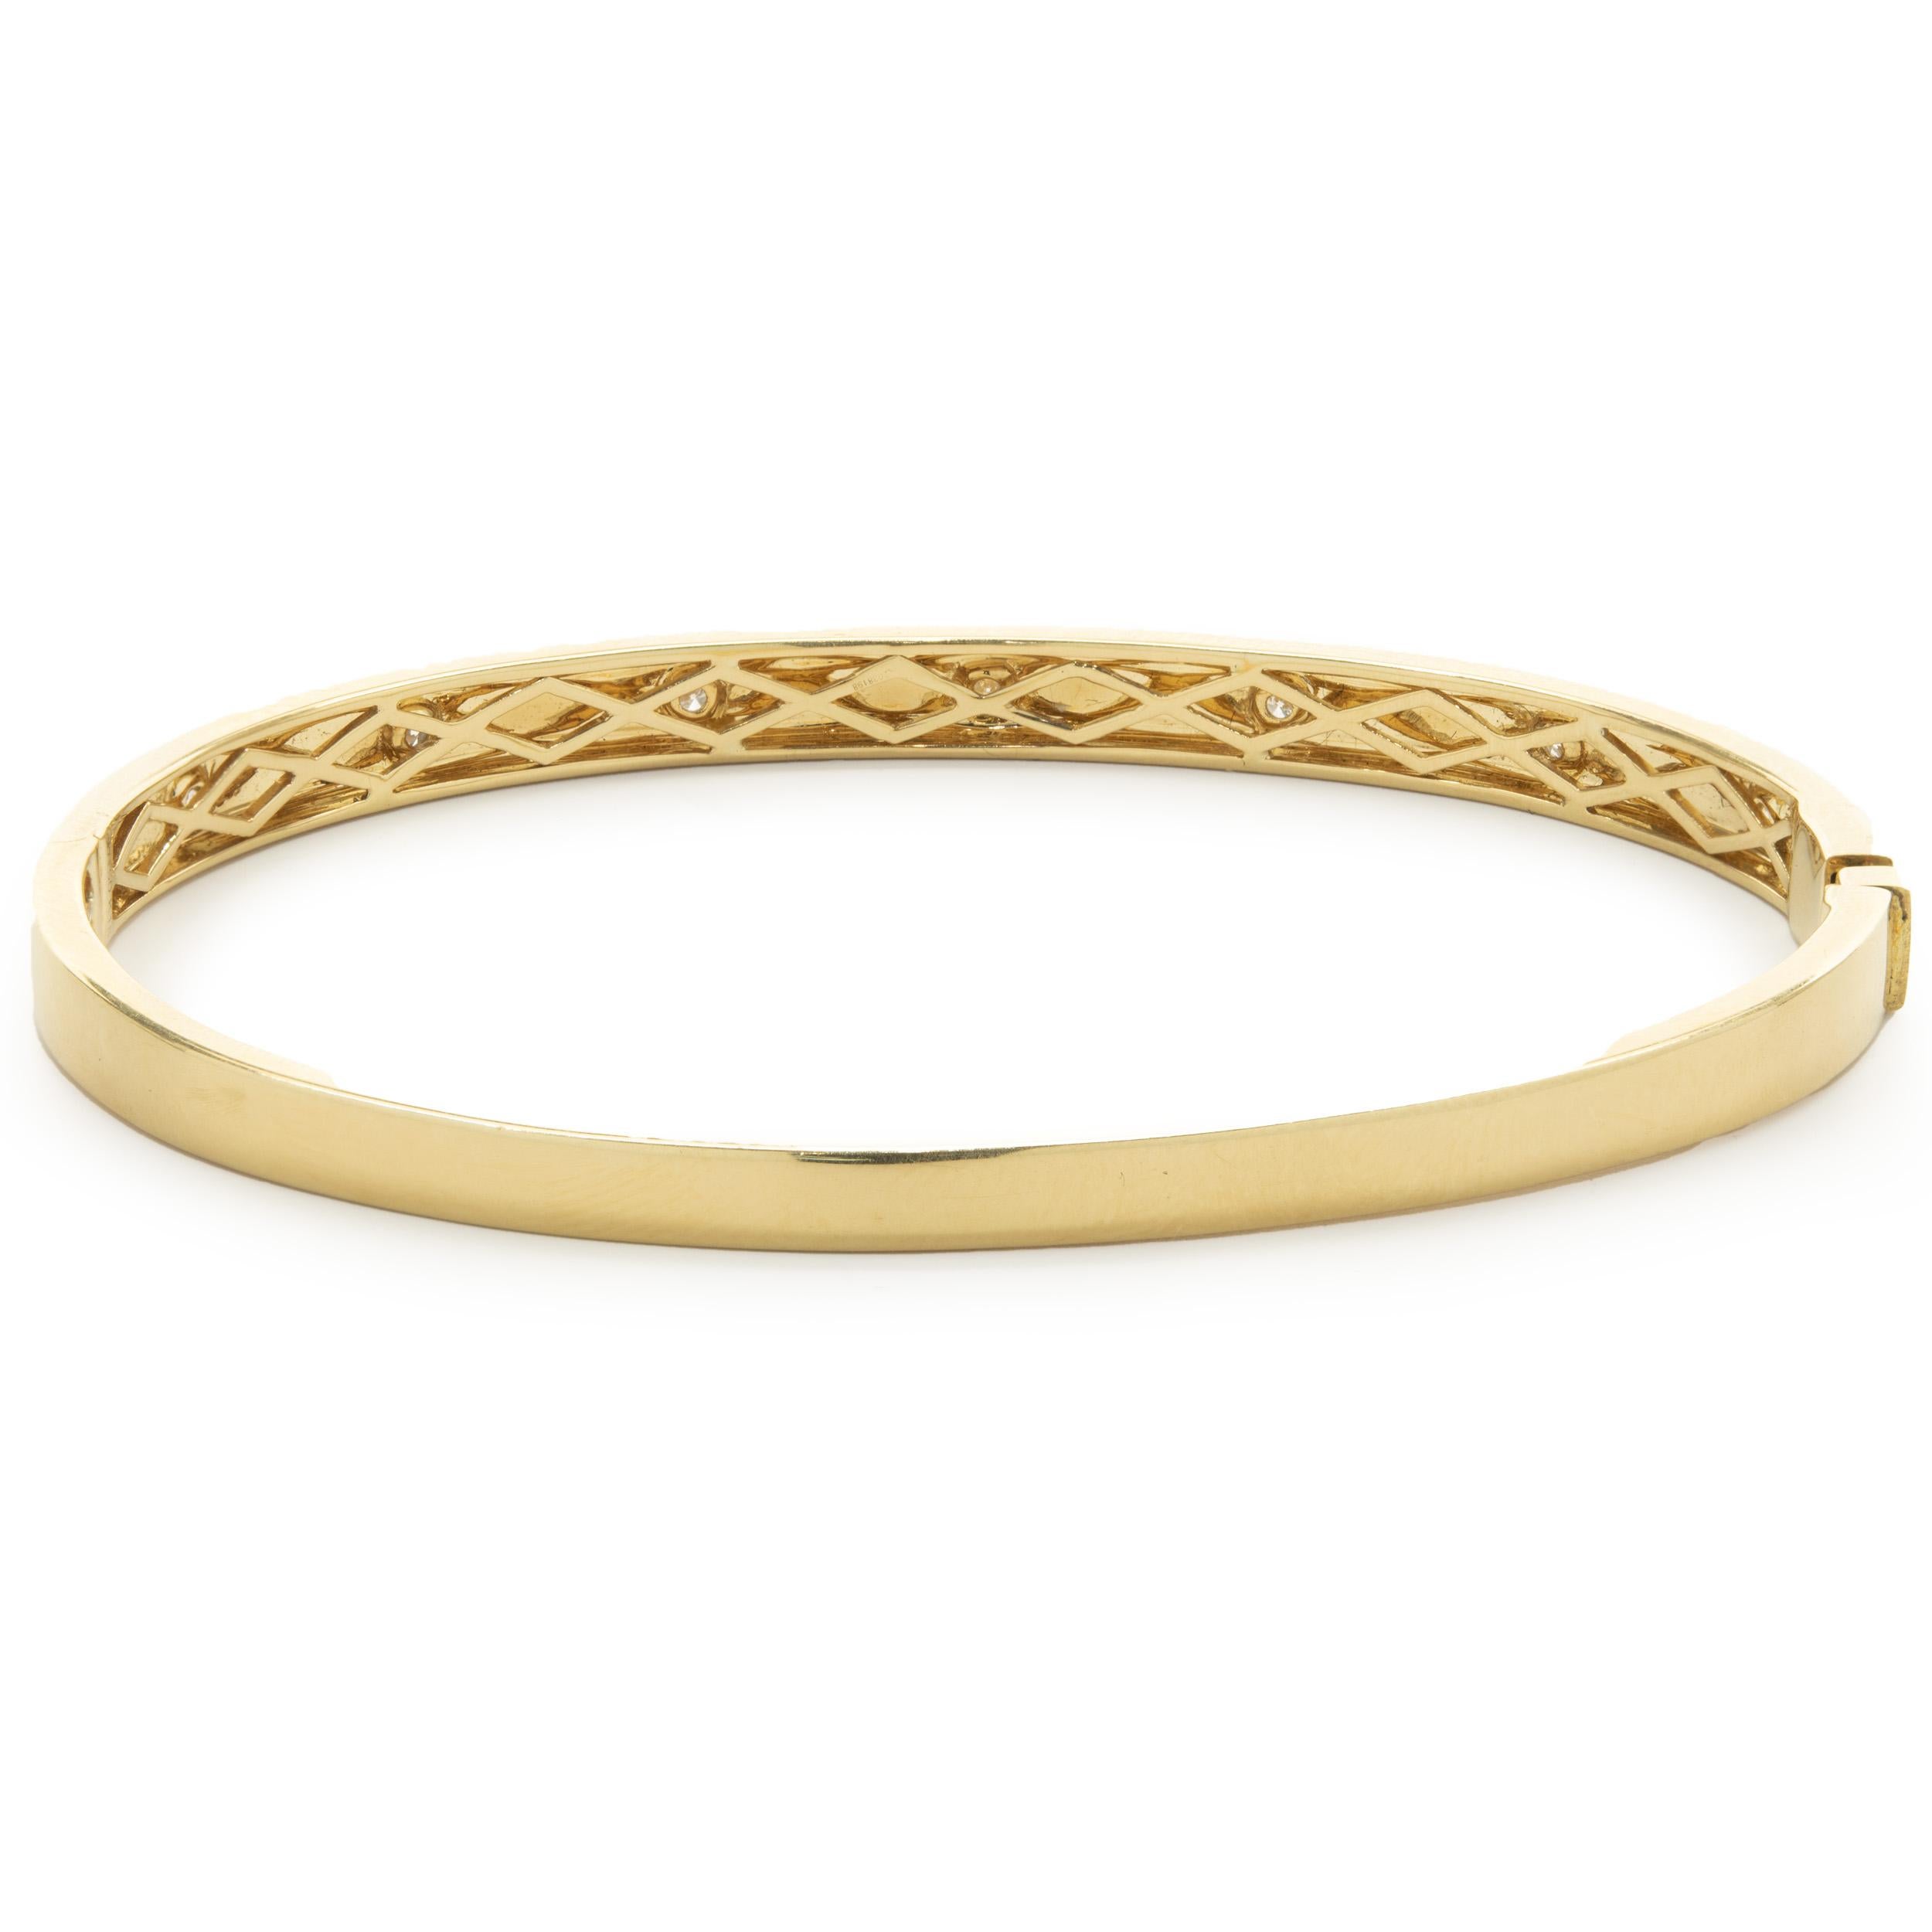 Designer: custom design
Material: 18K yellow gold
Diamonds: 7 round brilliant cut = .15cttw
Color: G
Clarity: VS2
Dimensions: bracelet will fit up to a 7.5-inch wrist
Weight: 14.06 grams